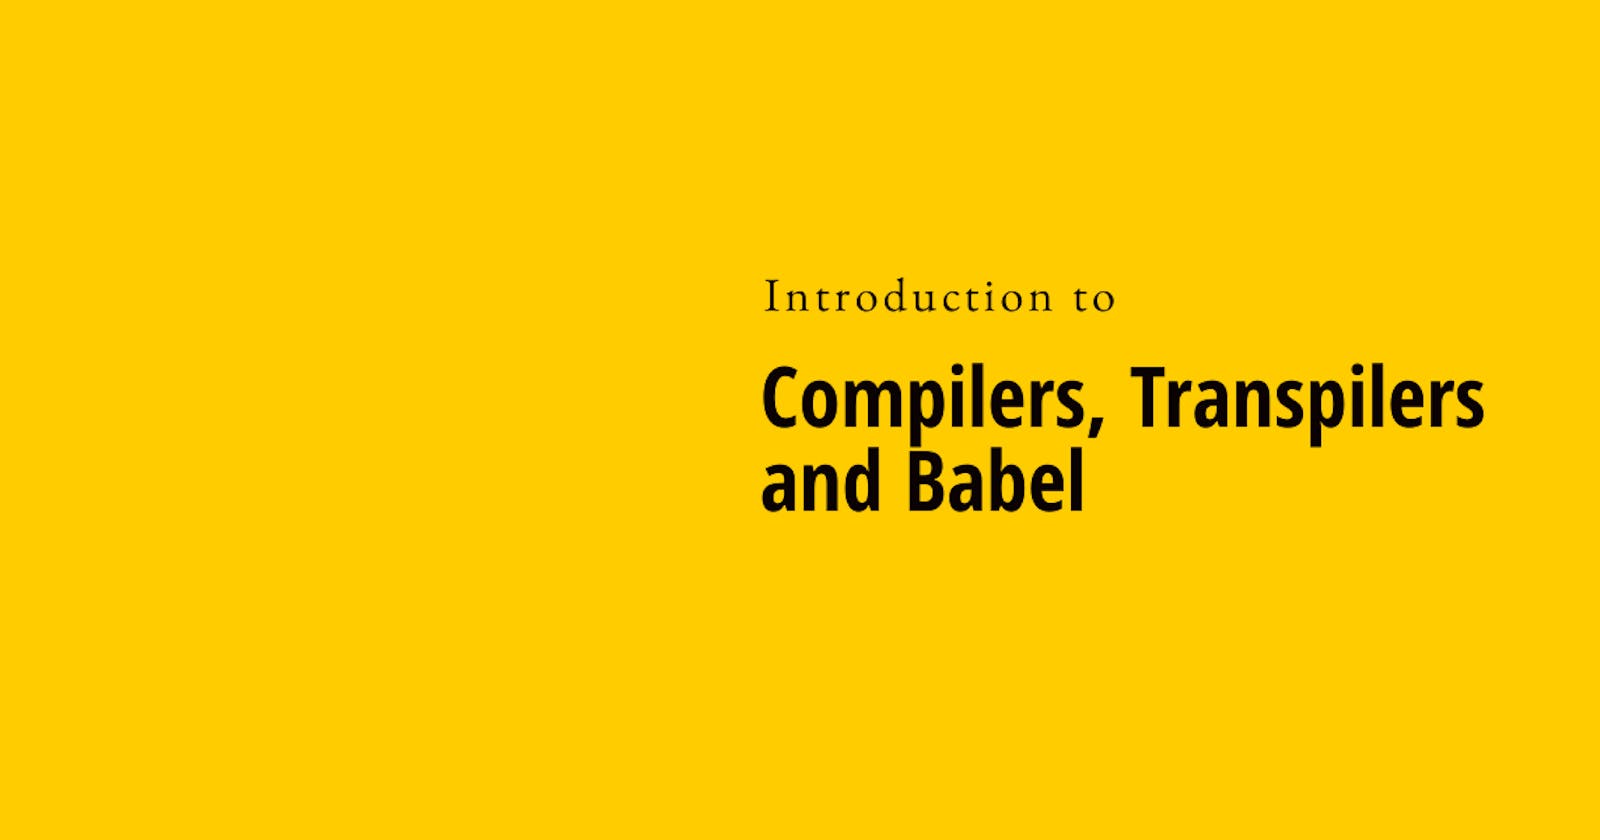 Introduction to Compilers, Transpilers and Babel